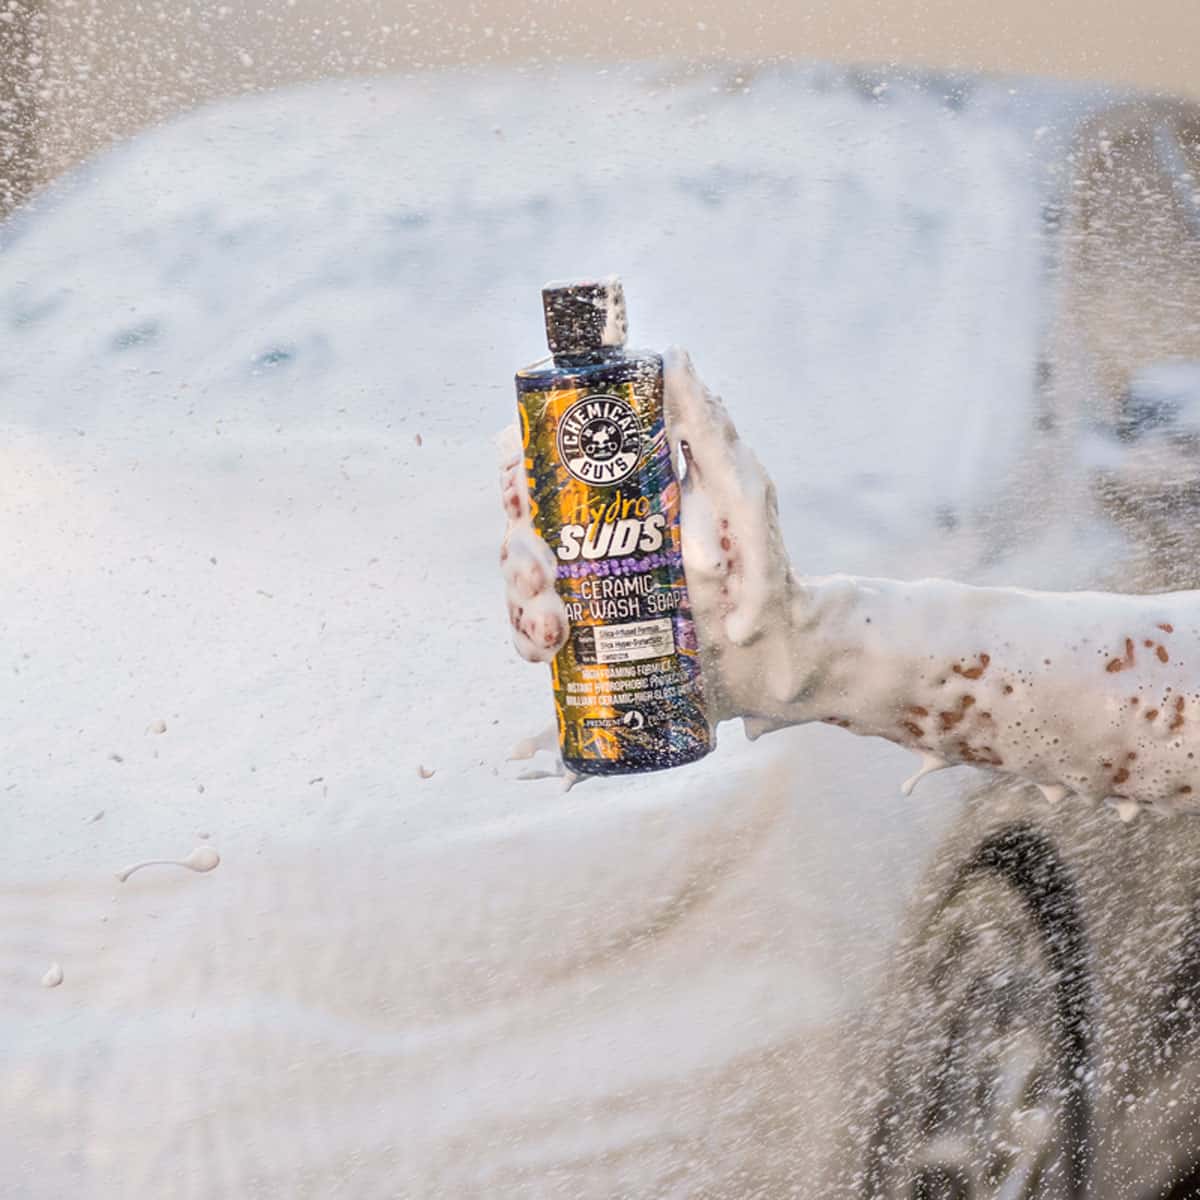 Chemical Guys Hydrosuds Ceramic Car Wash Soap: Extend the life of your ceramic paint protection: cover your car in hydrosuds